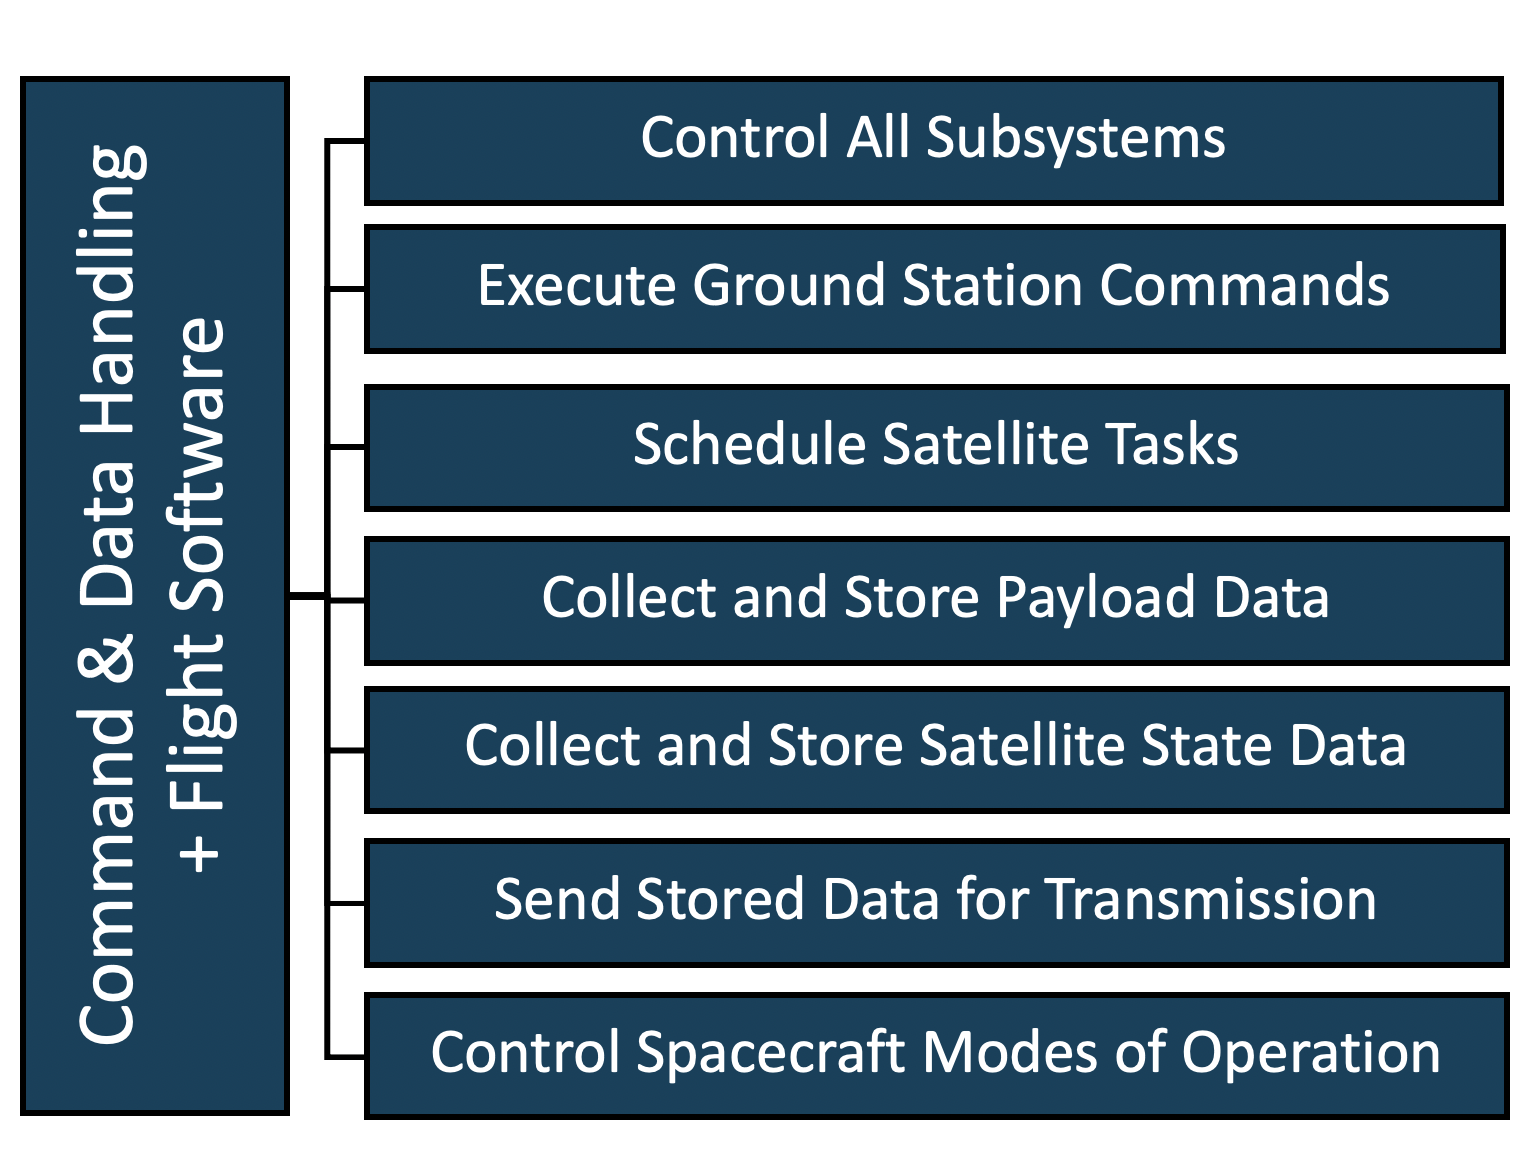 Command & Data Handling   
                    + Flight Software
                        Control All Subsystems
                        Execute Ground Station Commands
                        Schedule Satellite Tasks
                        Collect and Store Payload Data
                        Collect and Store Satellite State Data
                        Send Stored Data for Transmission
                        Control Spacecraft Modes of Operation
                    